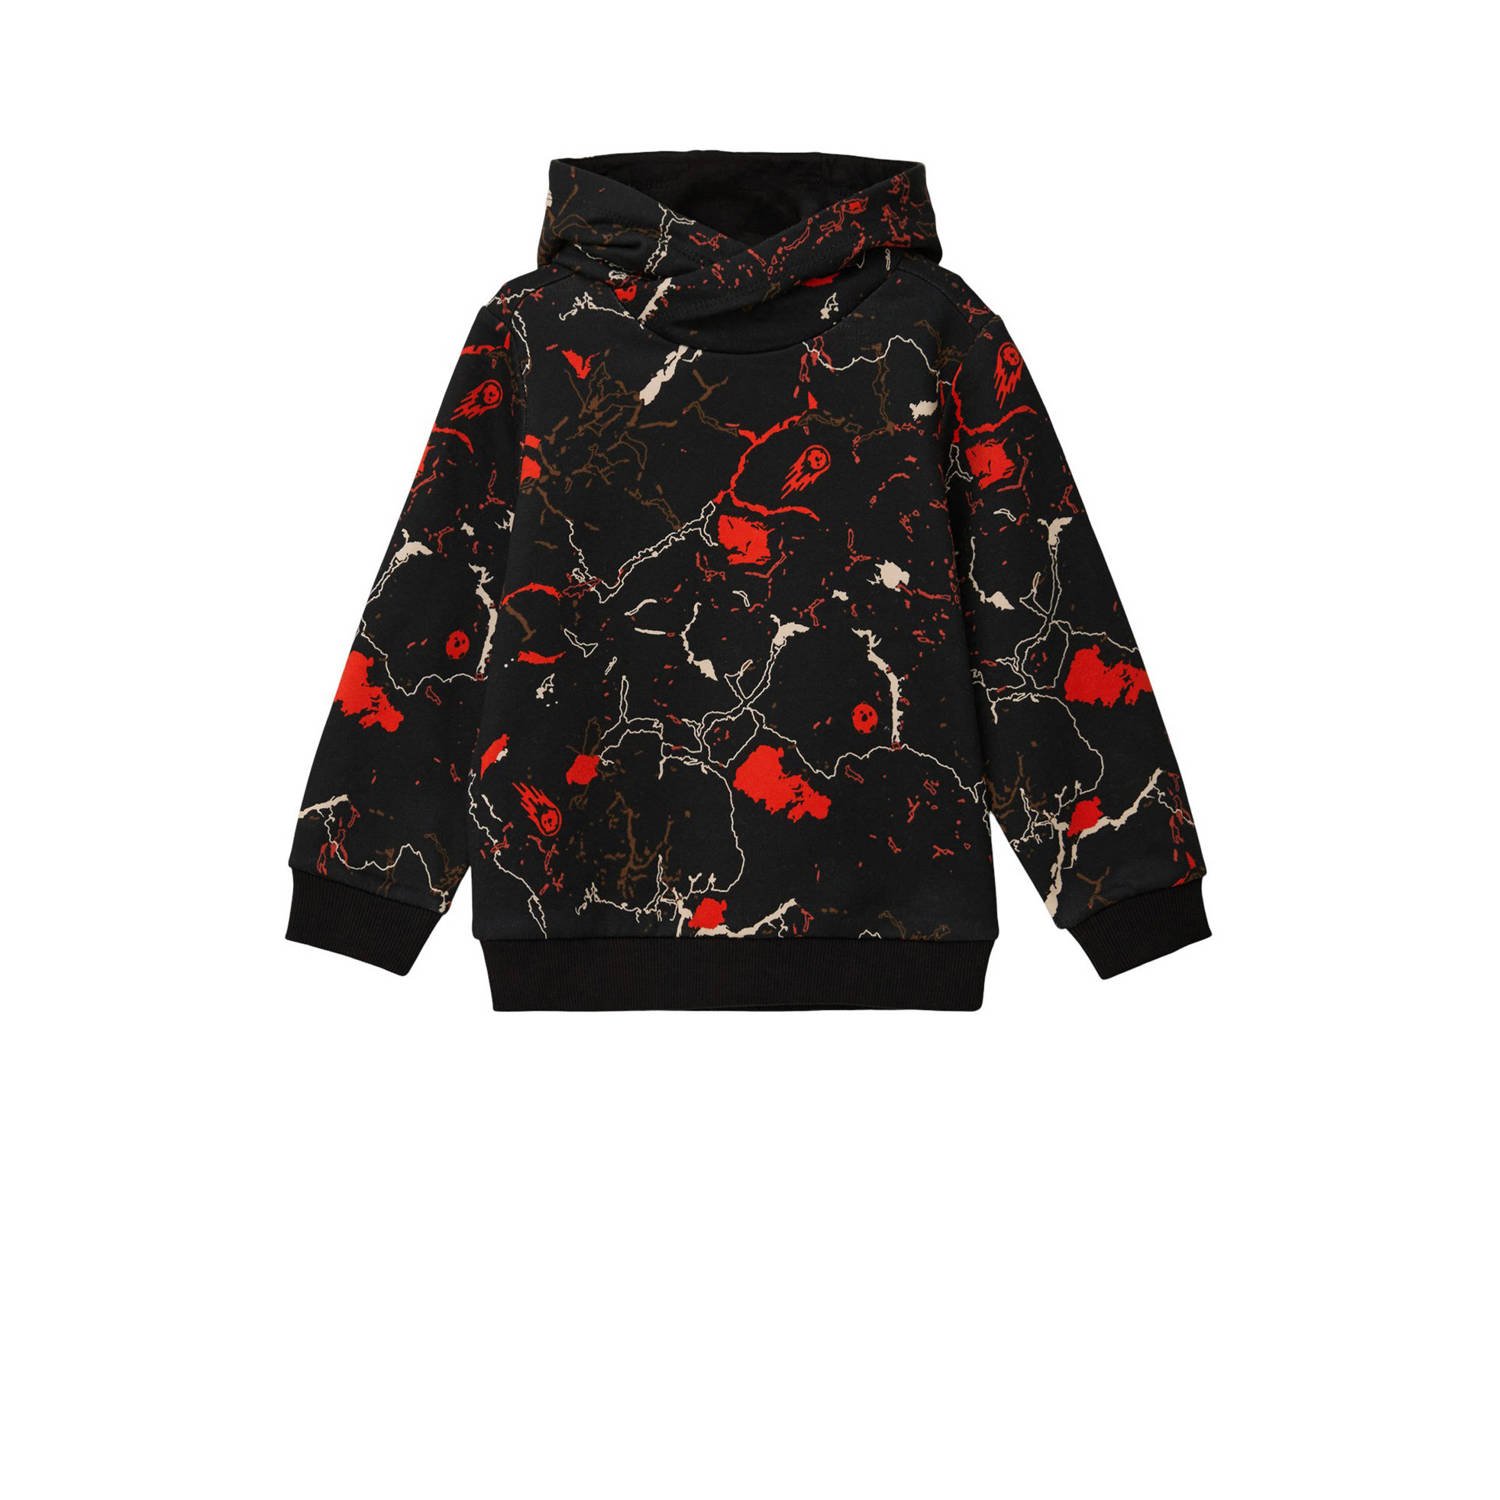 S.Oliver hoodie met all over print zwart rood Sweater All over print 116 122